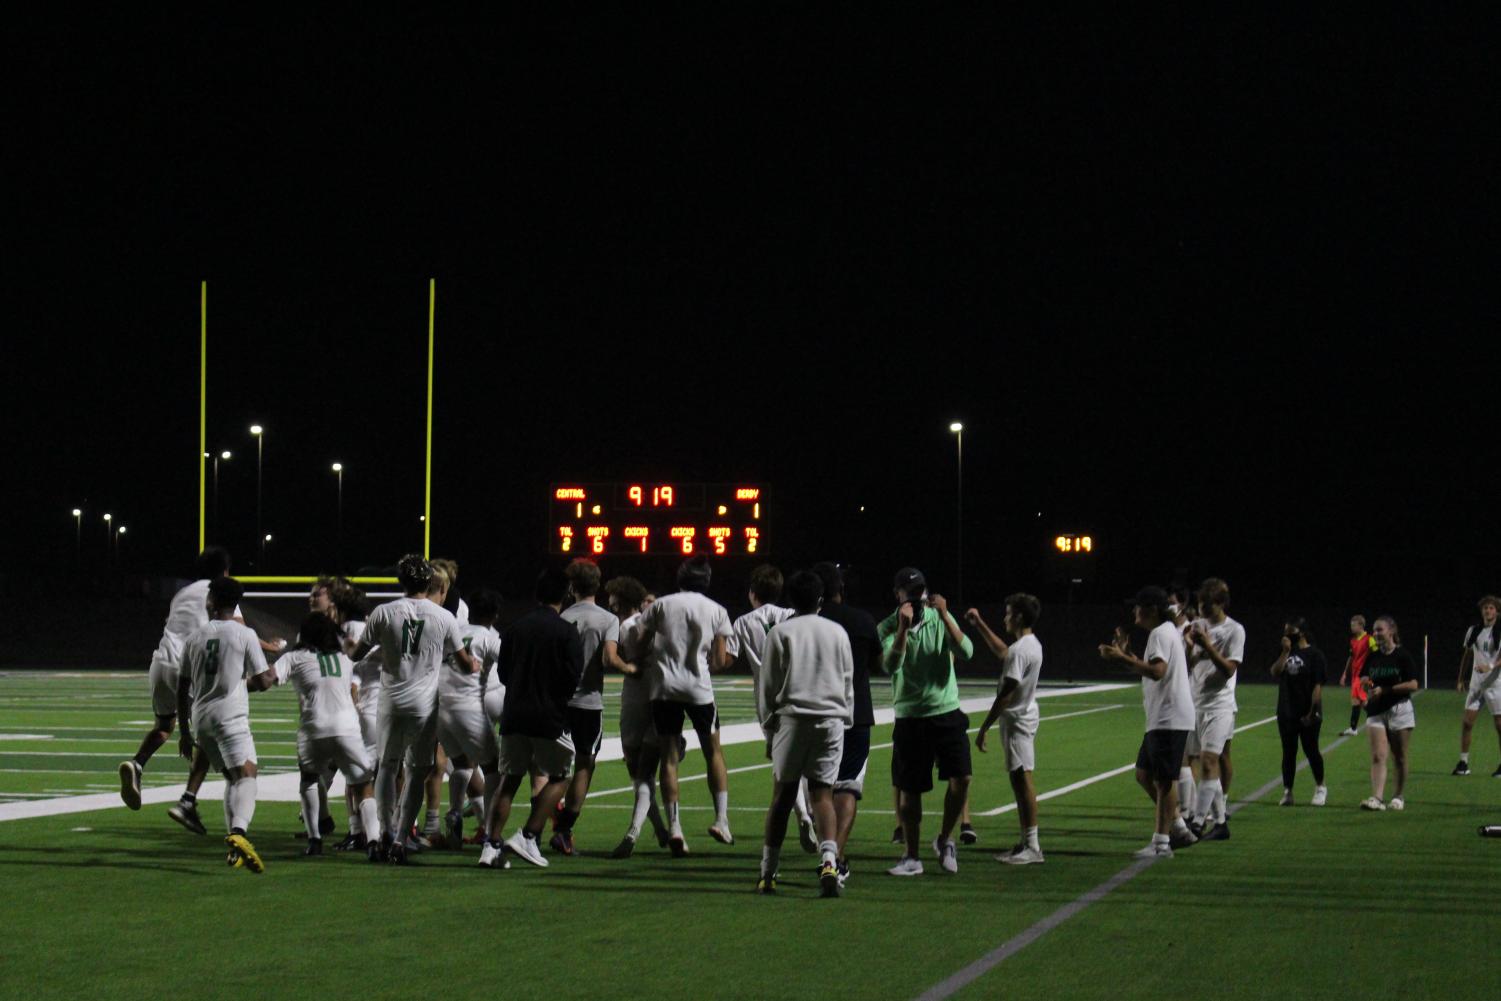 Derby+vs+Andover+Central+Soccer+Game+%28photos+by+Talia+Ransom%29